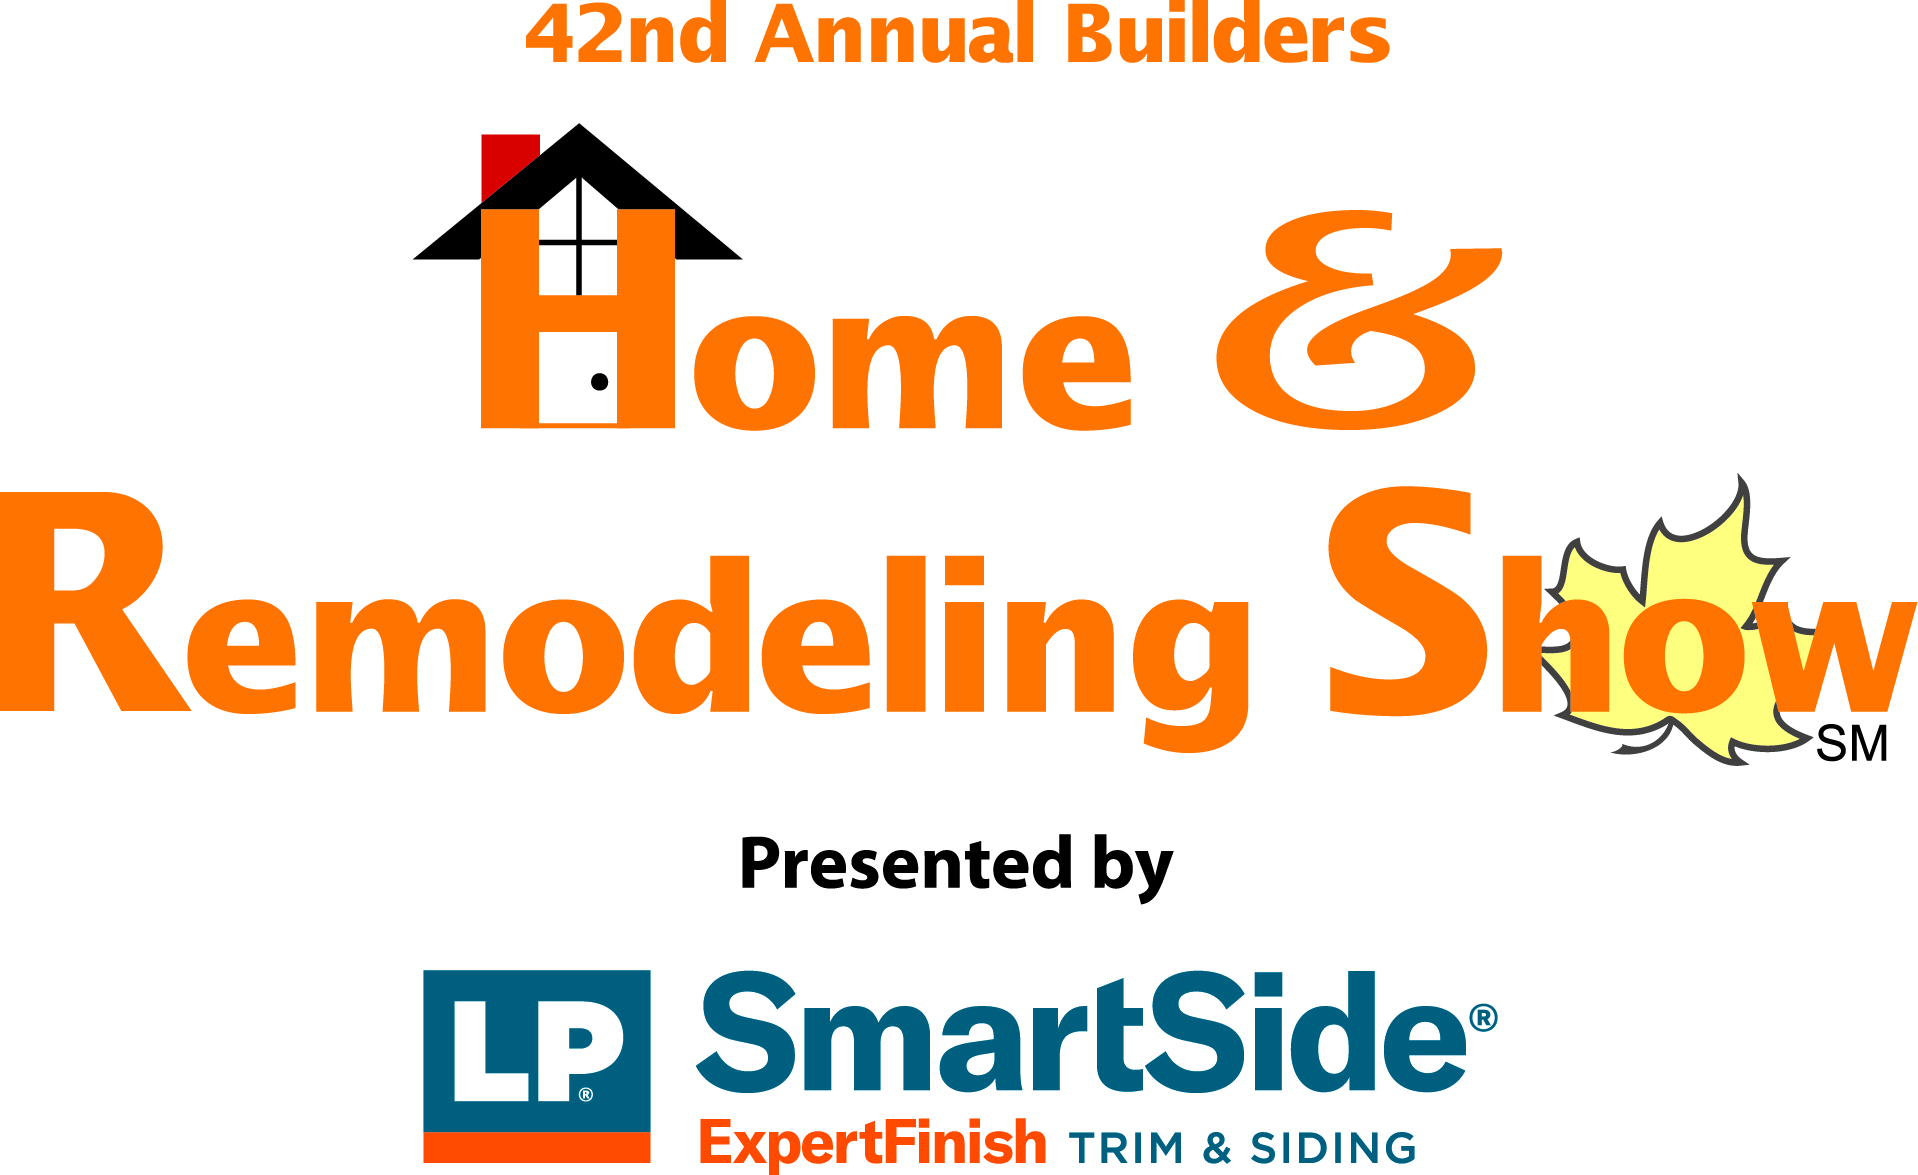 Builders Home & Remodeling Show, presented by LP SmartSide